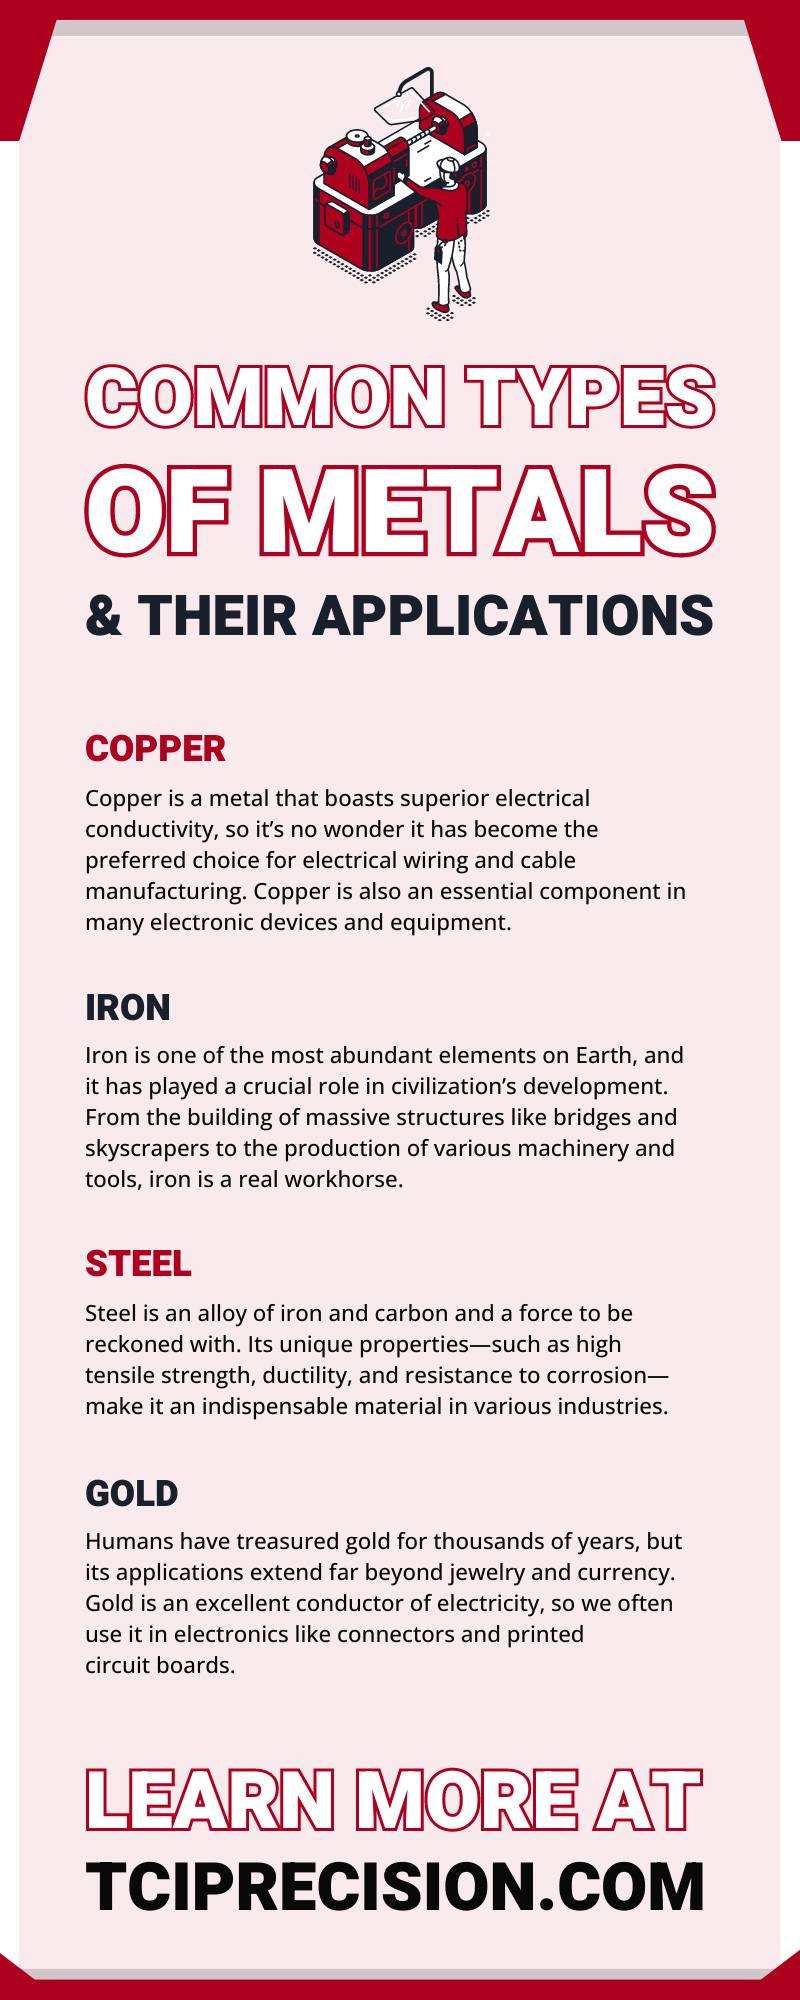 Common Types of Metals & Their Applications